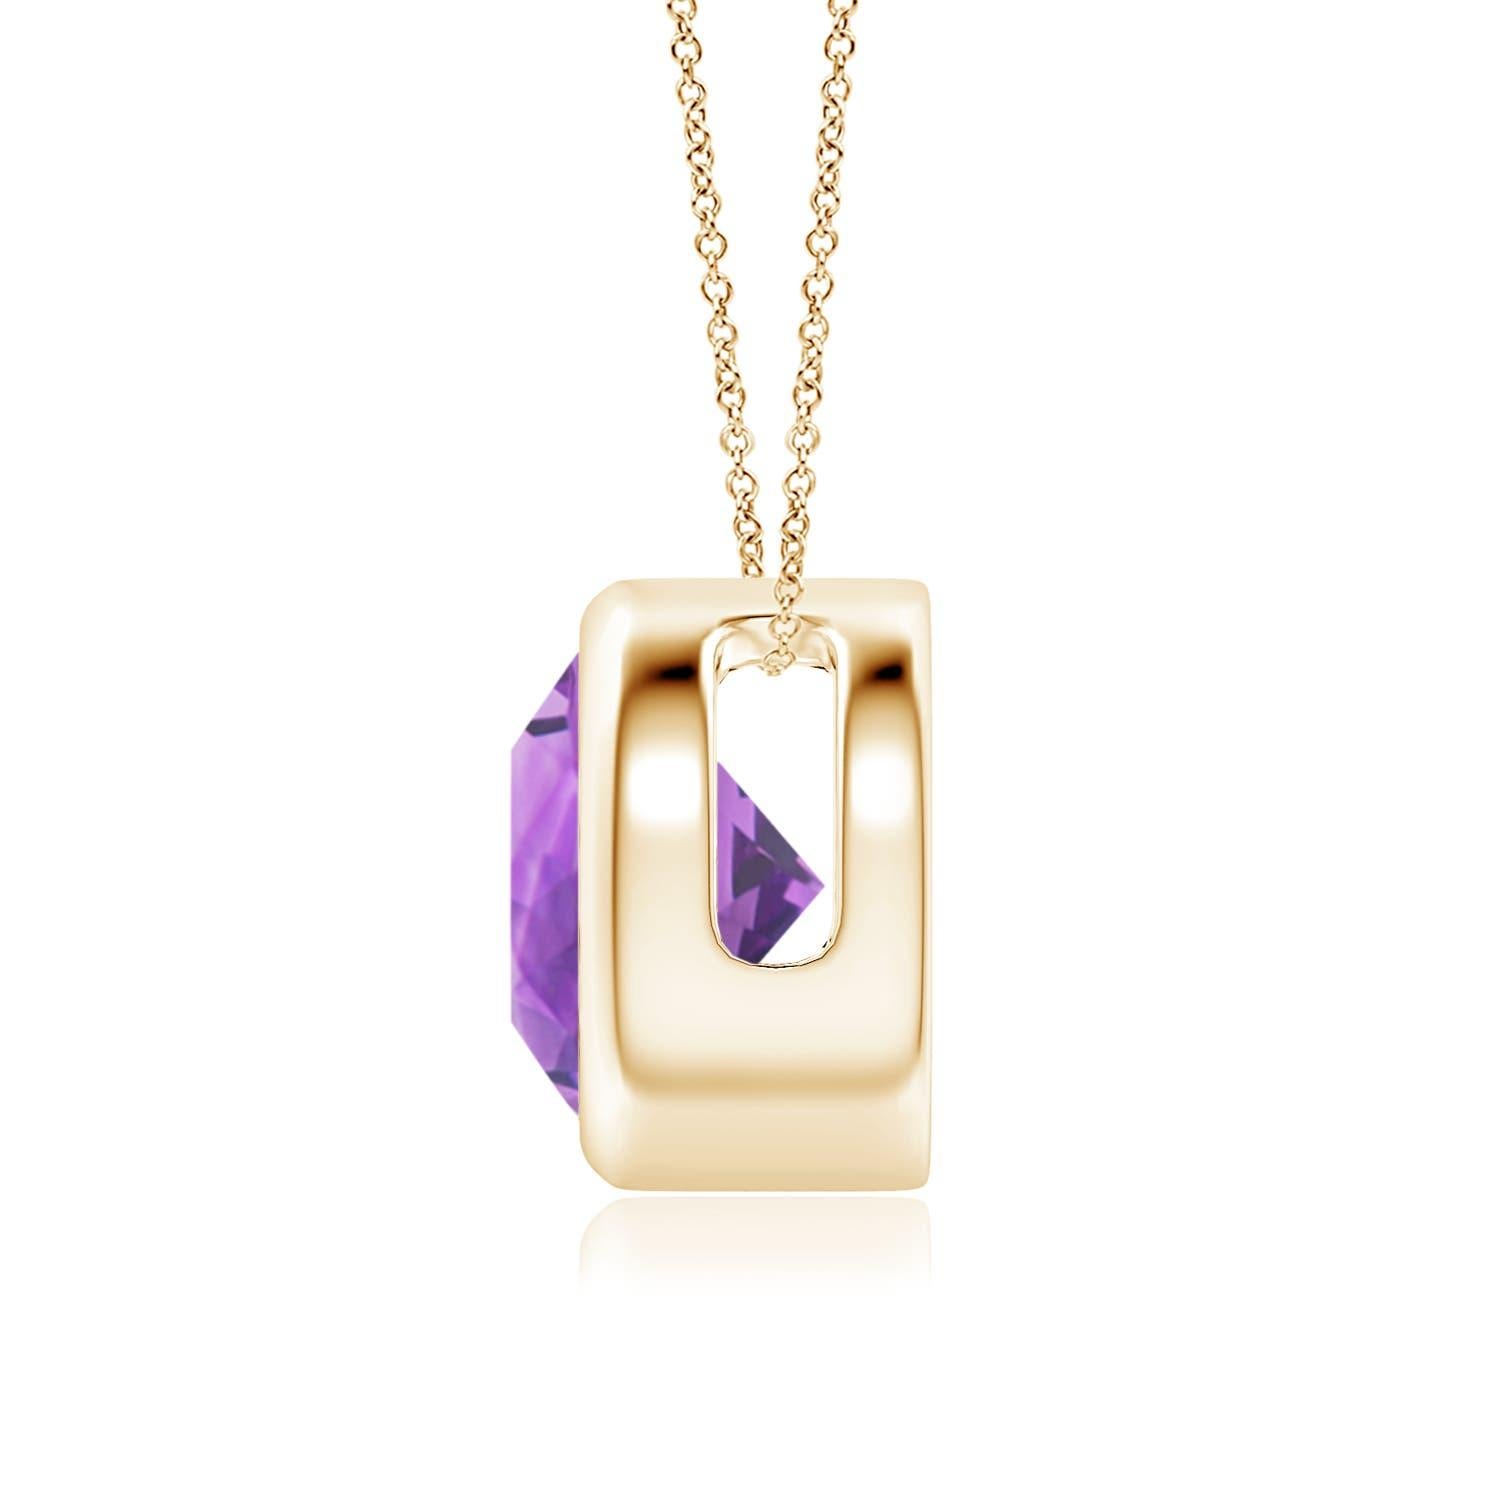 Modern Natural Bezel-Set Round 1.7ct Amethyst Solitaire Pendant in 14K Yellow Gold For Sale